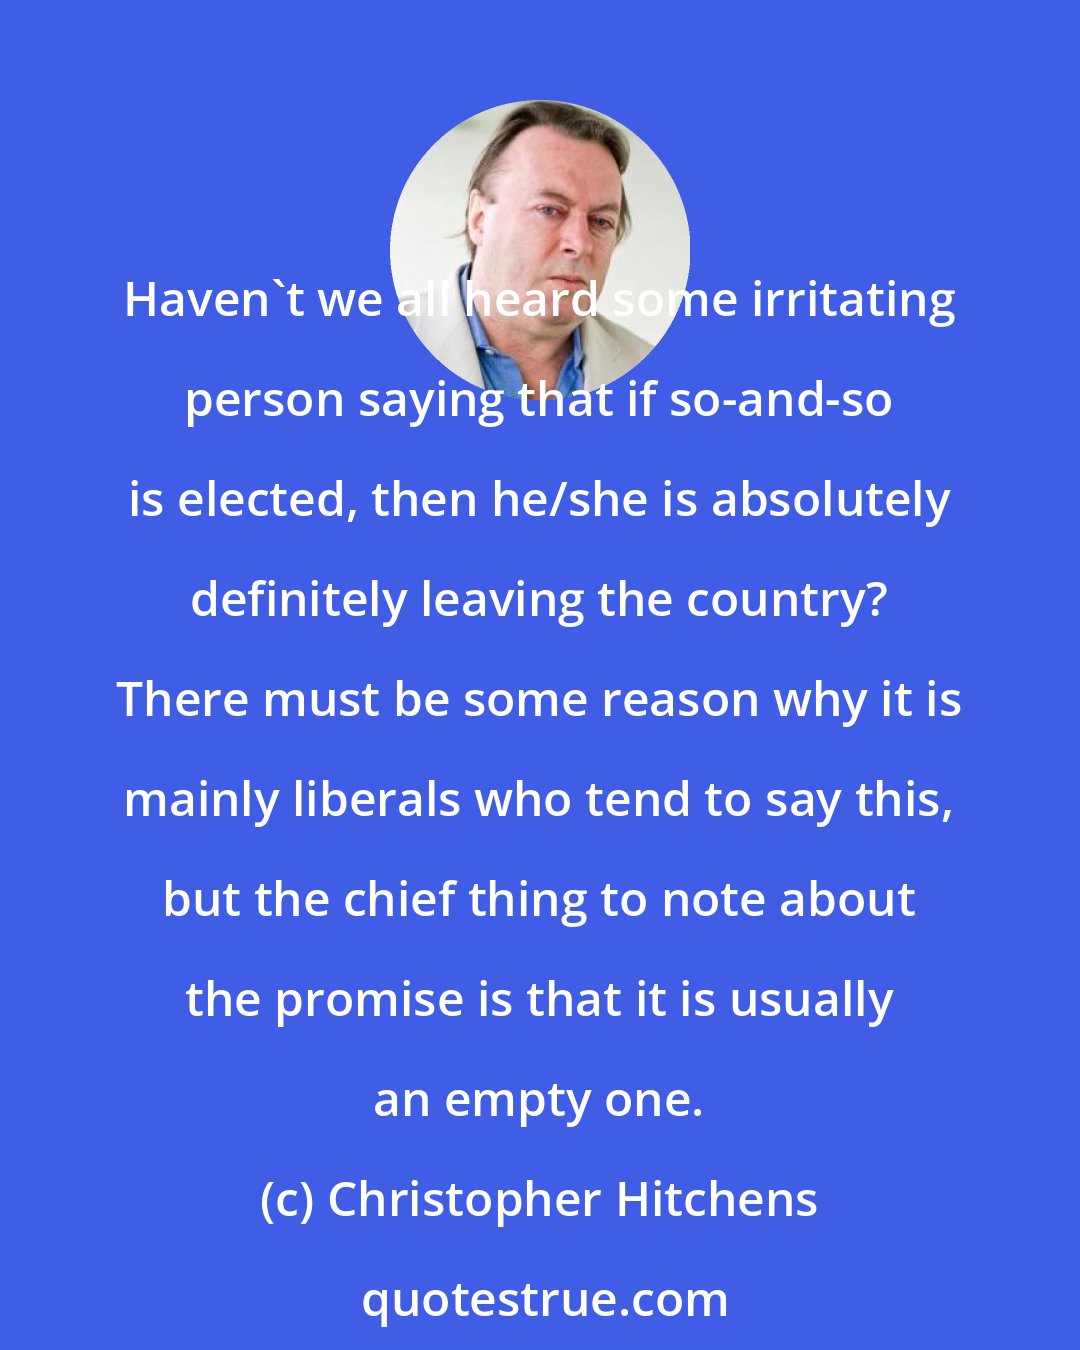 Christopher Hitchens: Haven't we all heard some irritating person saying that if so-and-so is elected, then he/she is absolutely definitely leaving the country? There must be some reason why it is mainly liberals who tend to say this, but the chief thing to note about the promise is that it is usually an empty one.